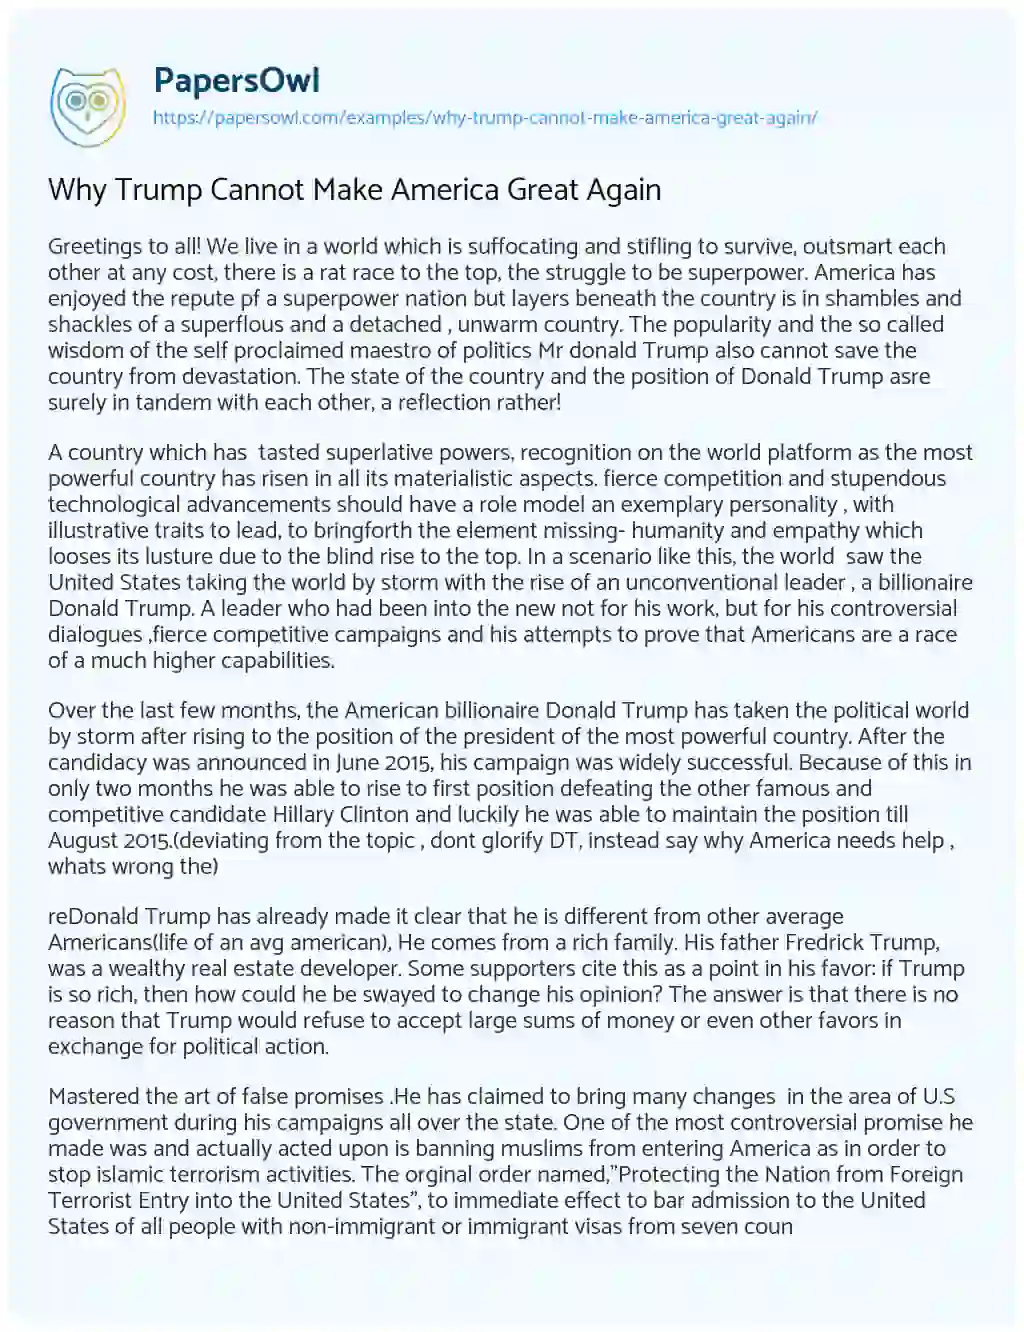 Essay on Why Trump cannot Make America Great again